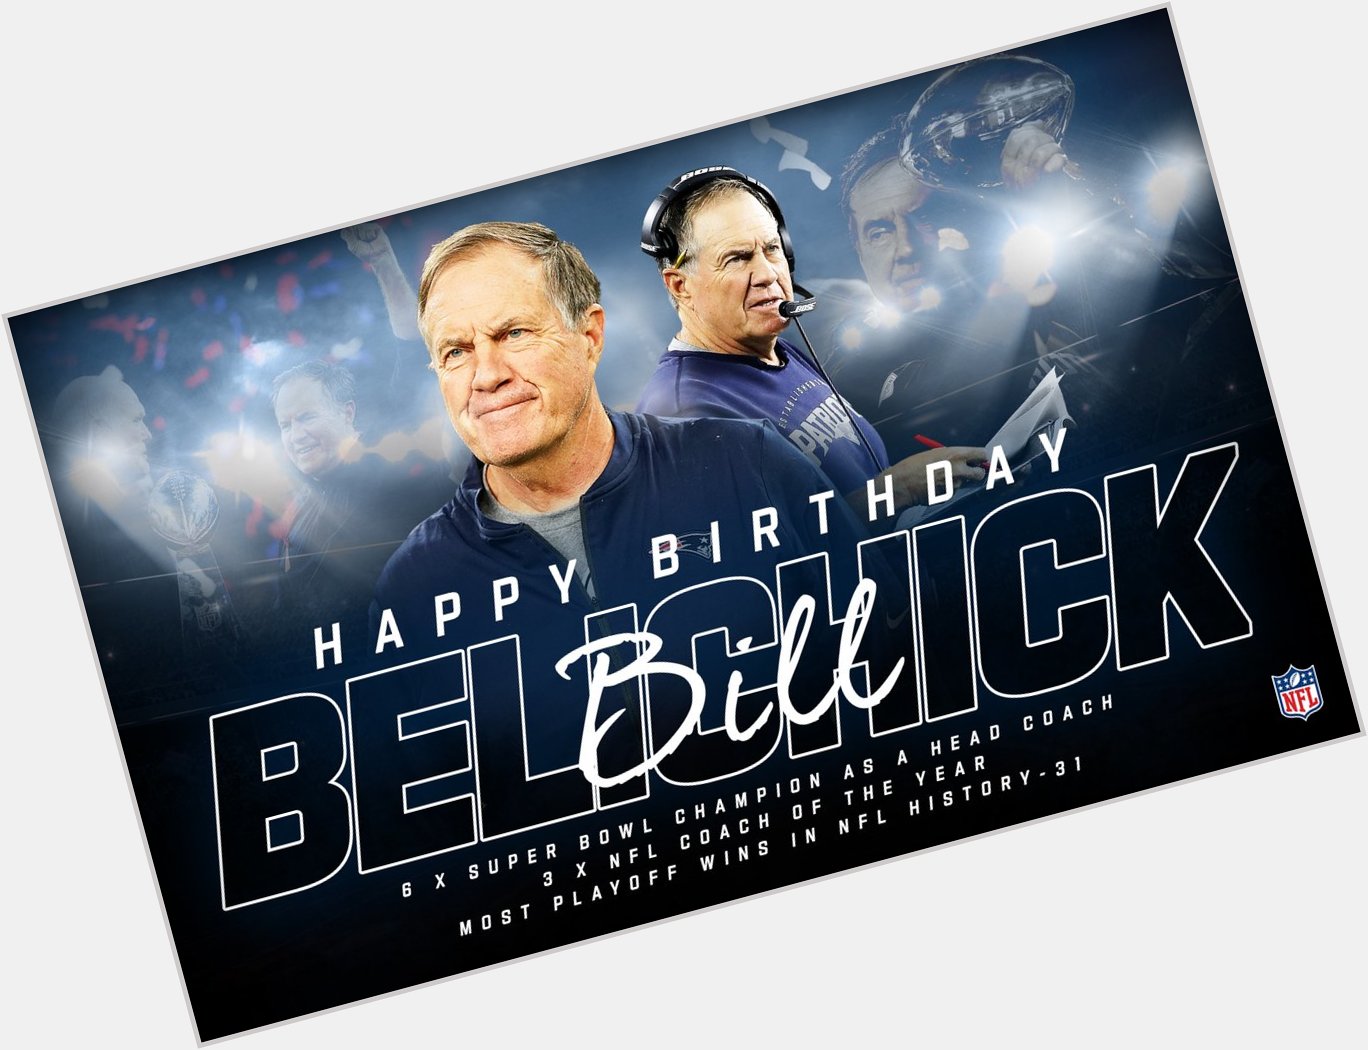 Happy 69th birthday to the head coach of the New England Patriots Bill Belichick 